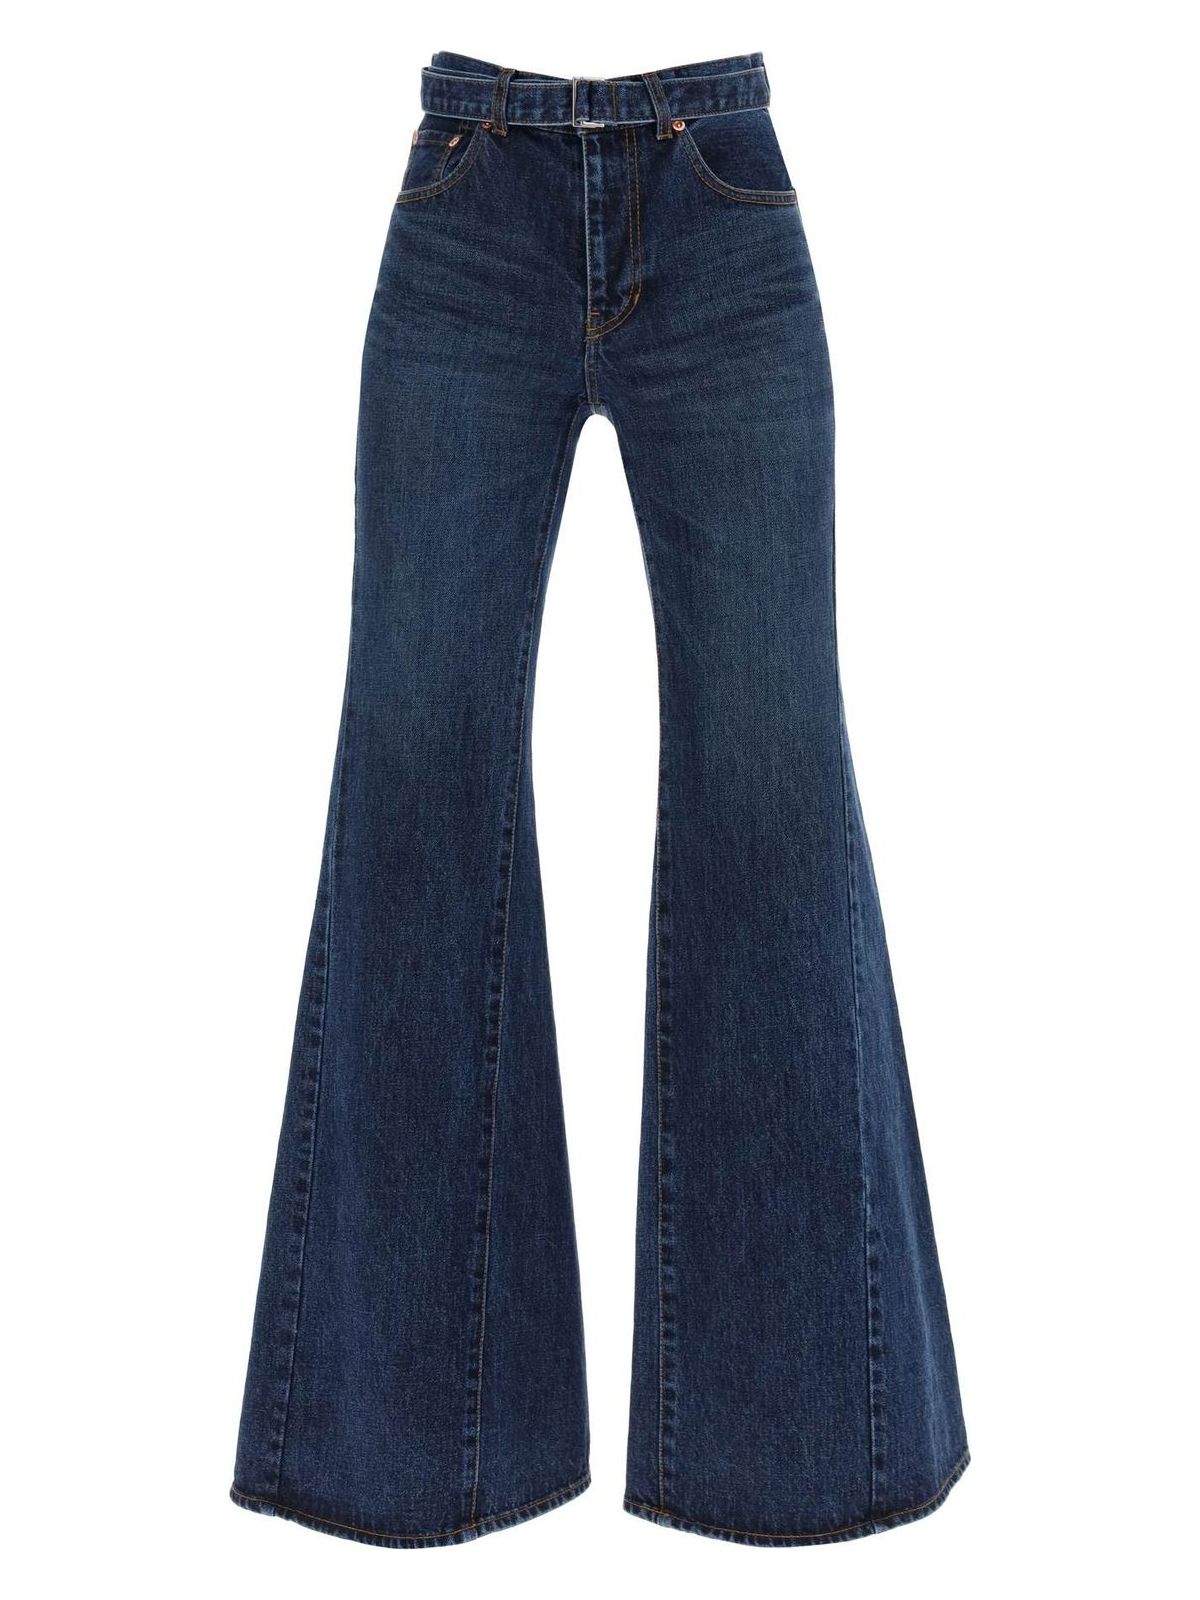 401 SACAI BOOT CUT JEANS WITH MATCHING BELT